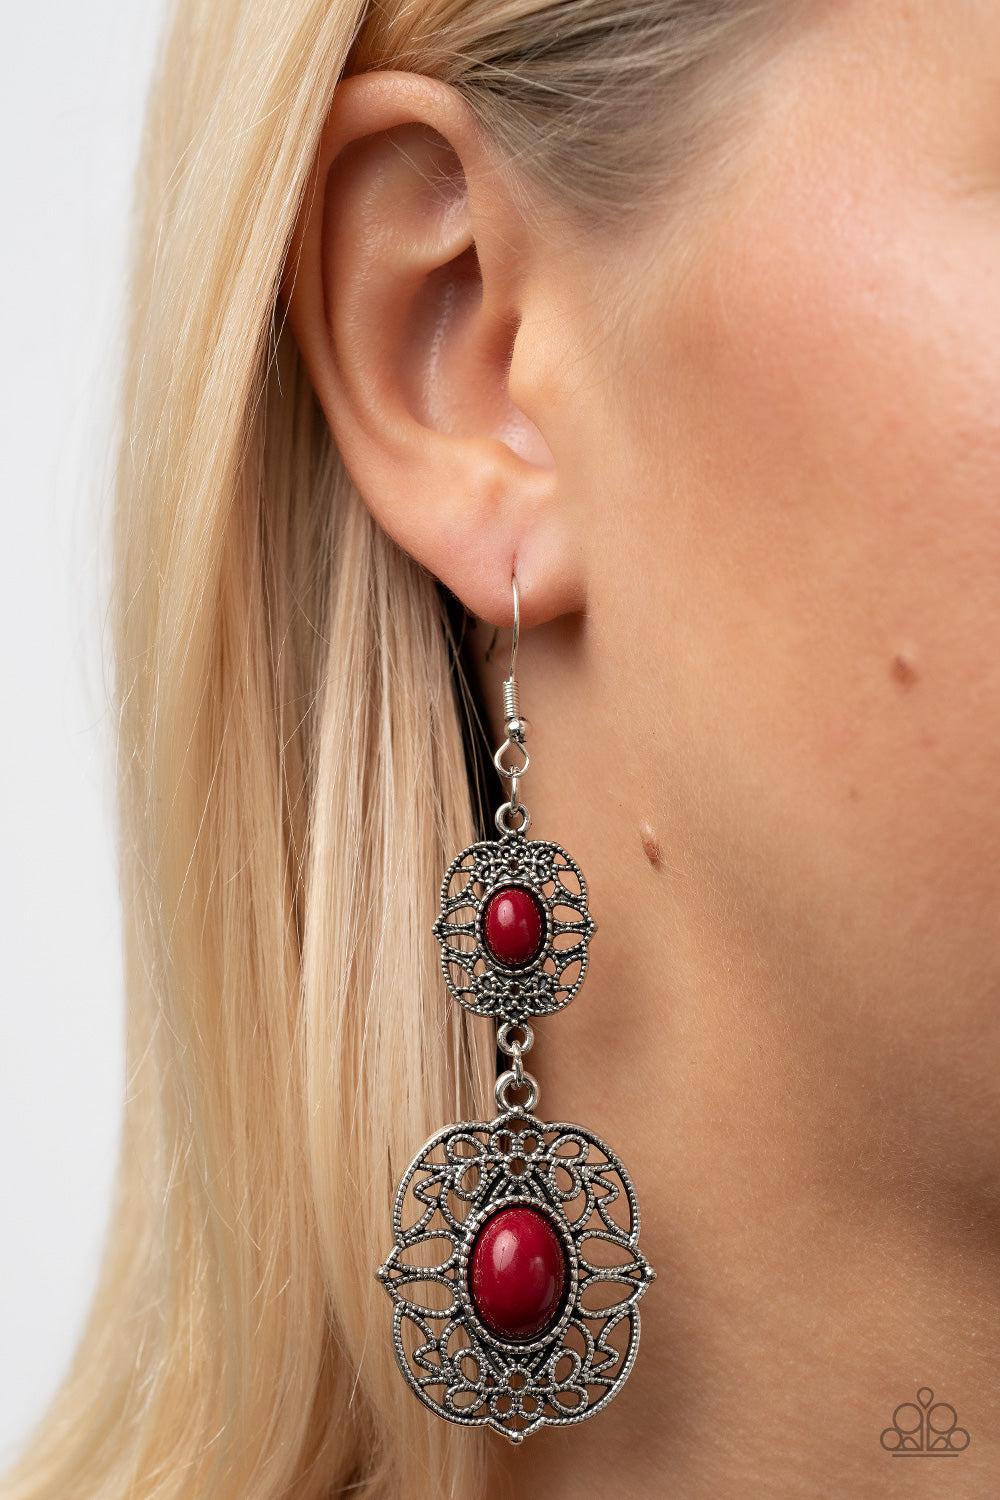 Victorian Villa Red Earrings - Paparazzi Accessories-on model - CarasShop.com - $5 Jewelry by Cara Jewels